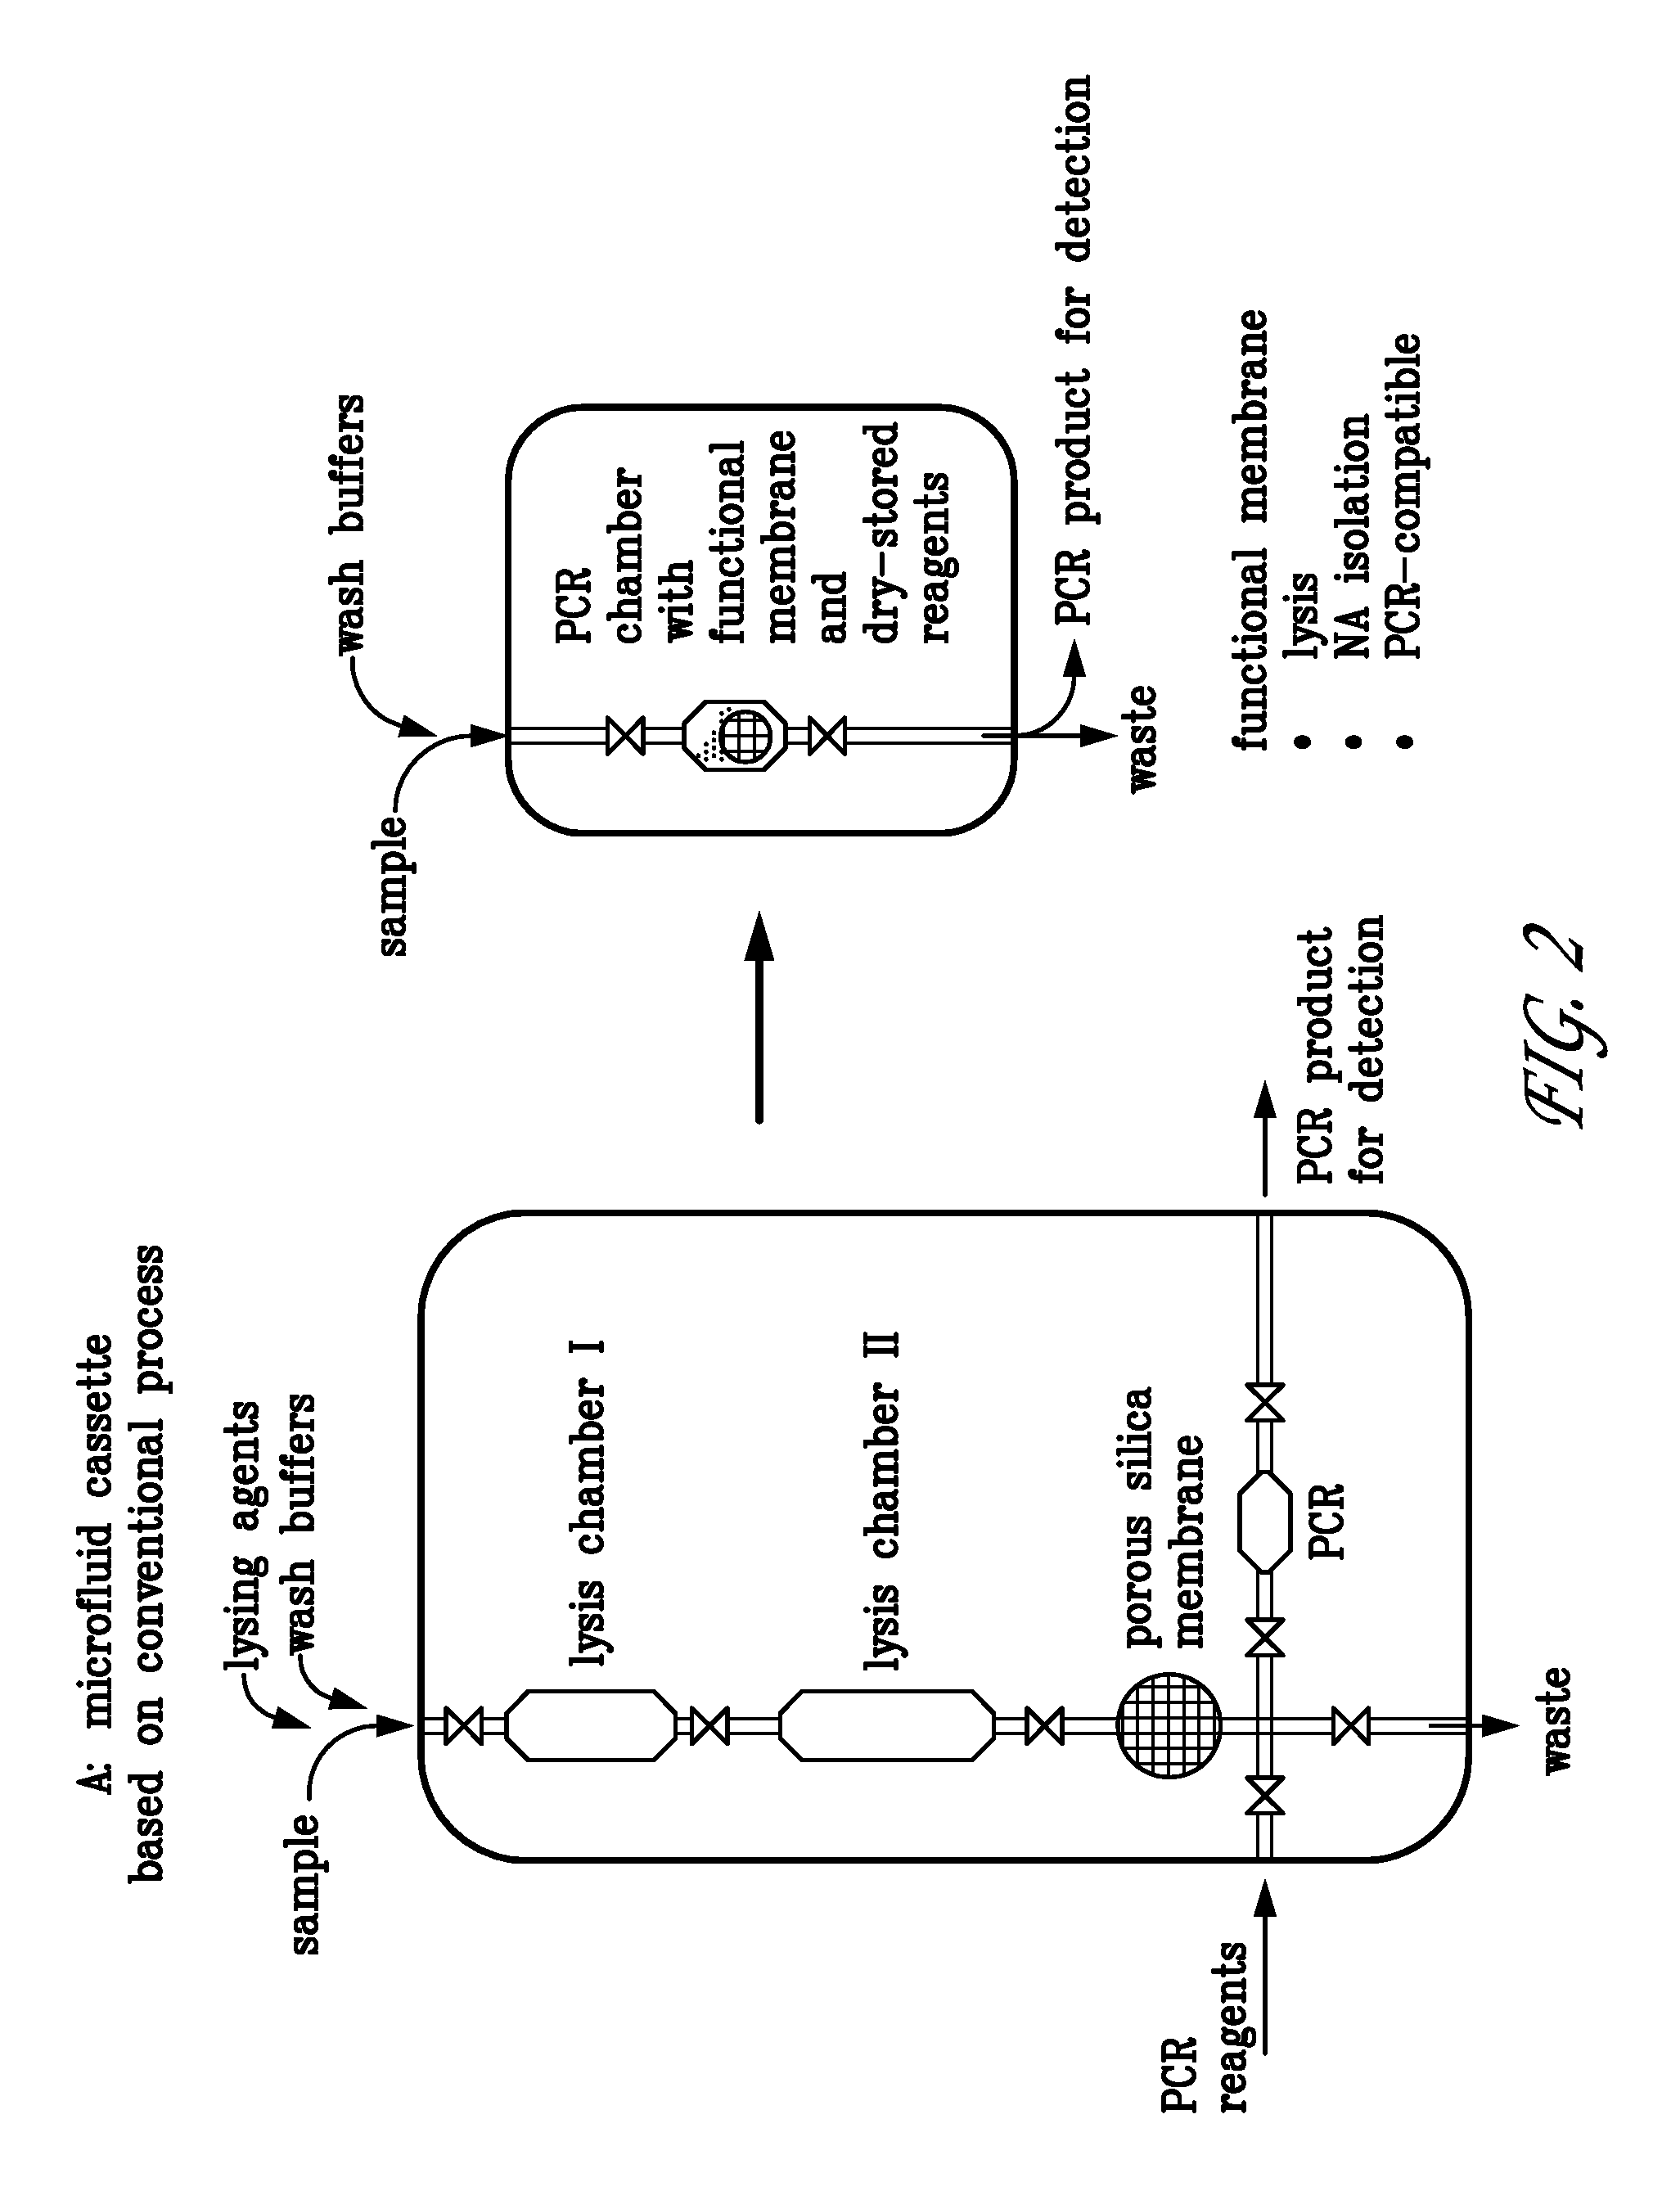 Integrated PCR reactor for cell lysis, nucleic acid isolation and purification, and nucleic acid amplication related applications